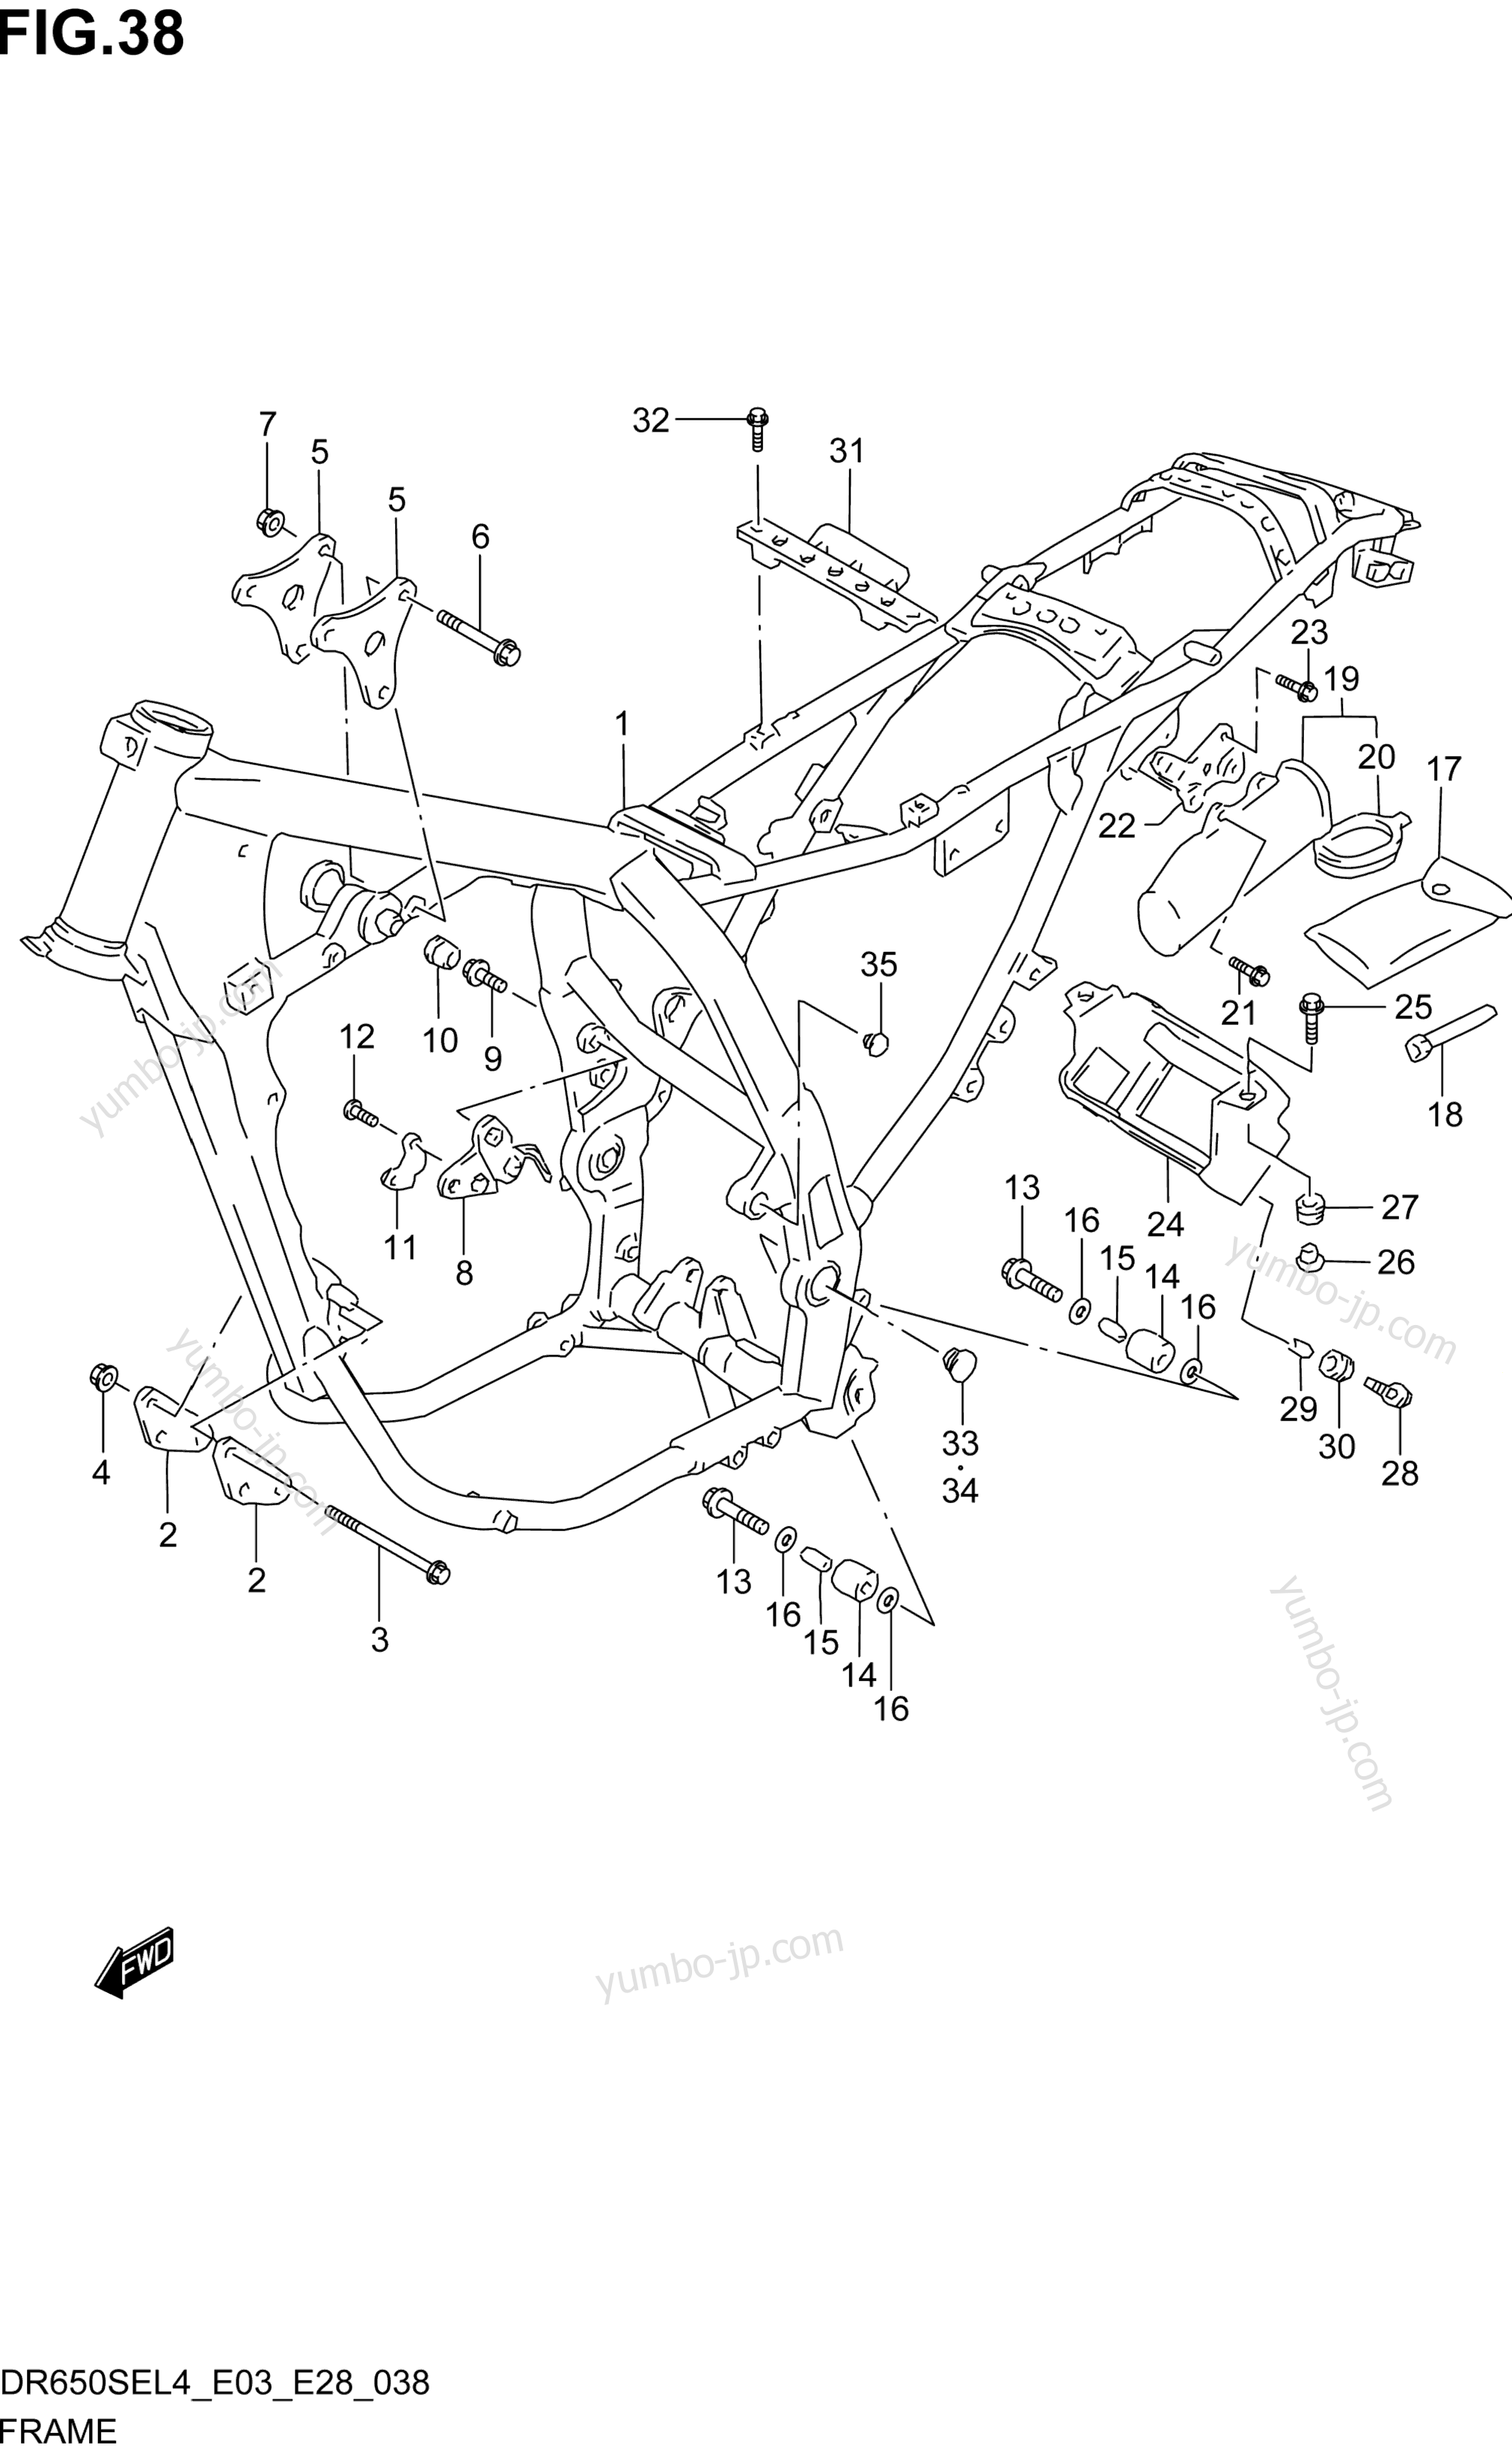 FRAME (DR650SEL4 E33) for motorcycles SUZUKI DR650SE 2014 year